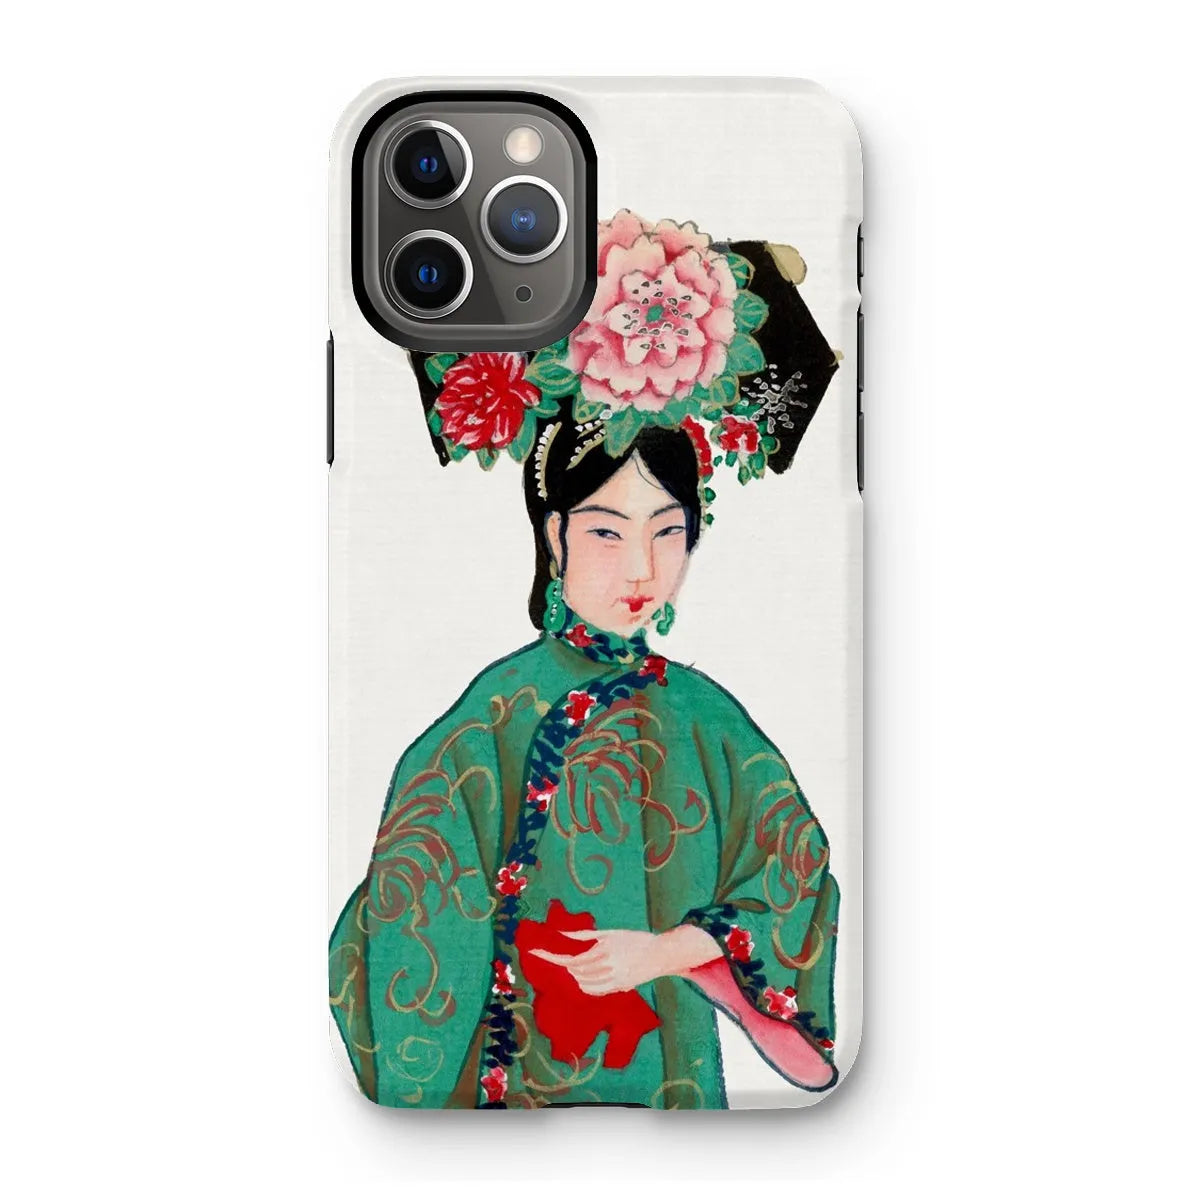 Chinese Noblewoman In Manchu Couture Art Phone Case - Iphone 11 Pro / Matte - Mobile Phone Cases - Aesthetic Art